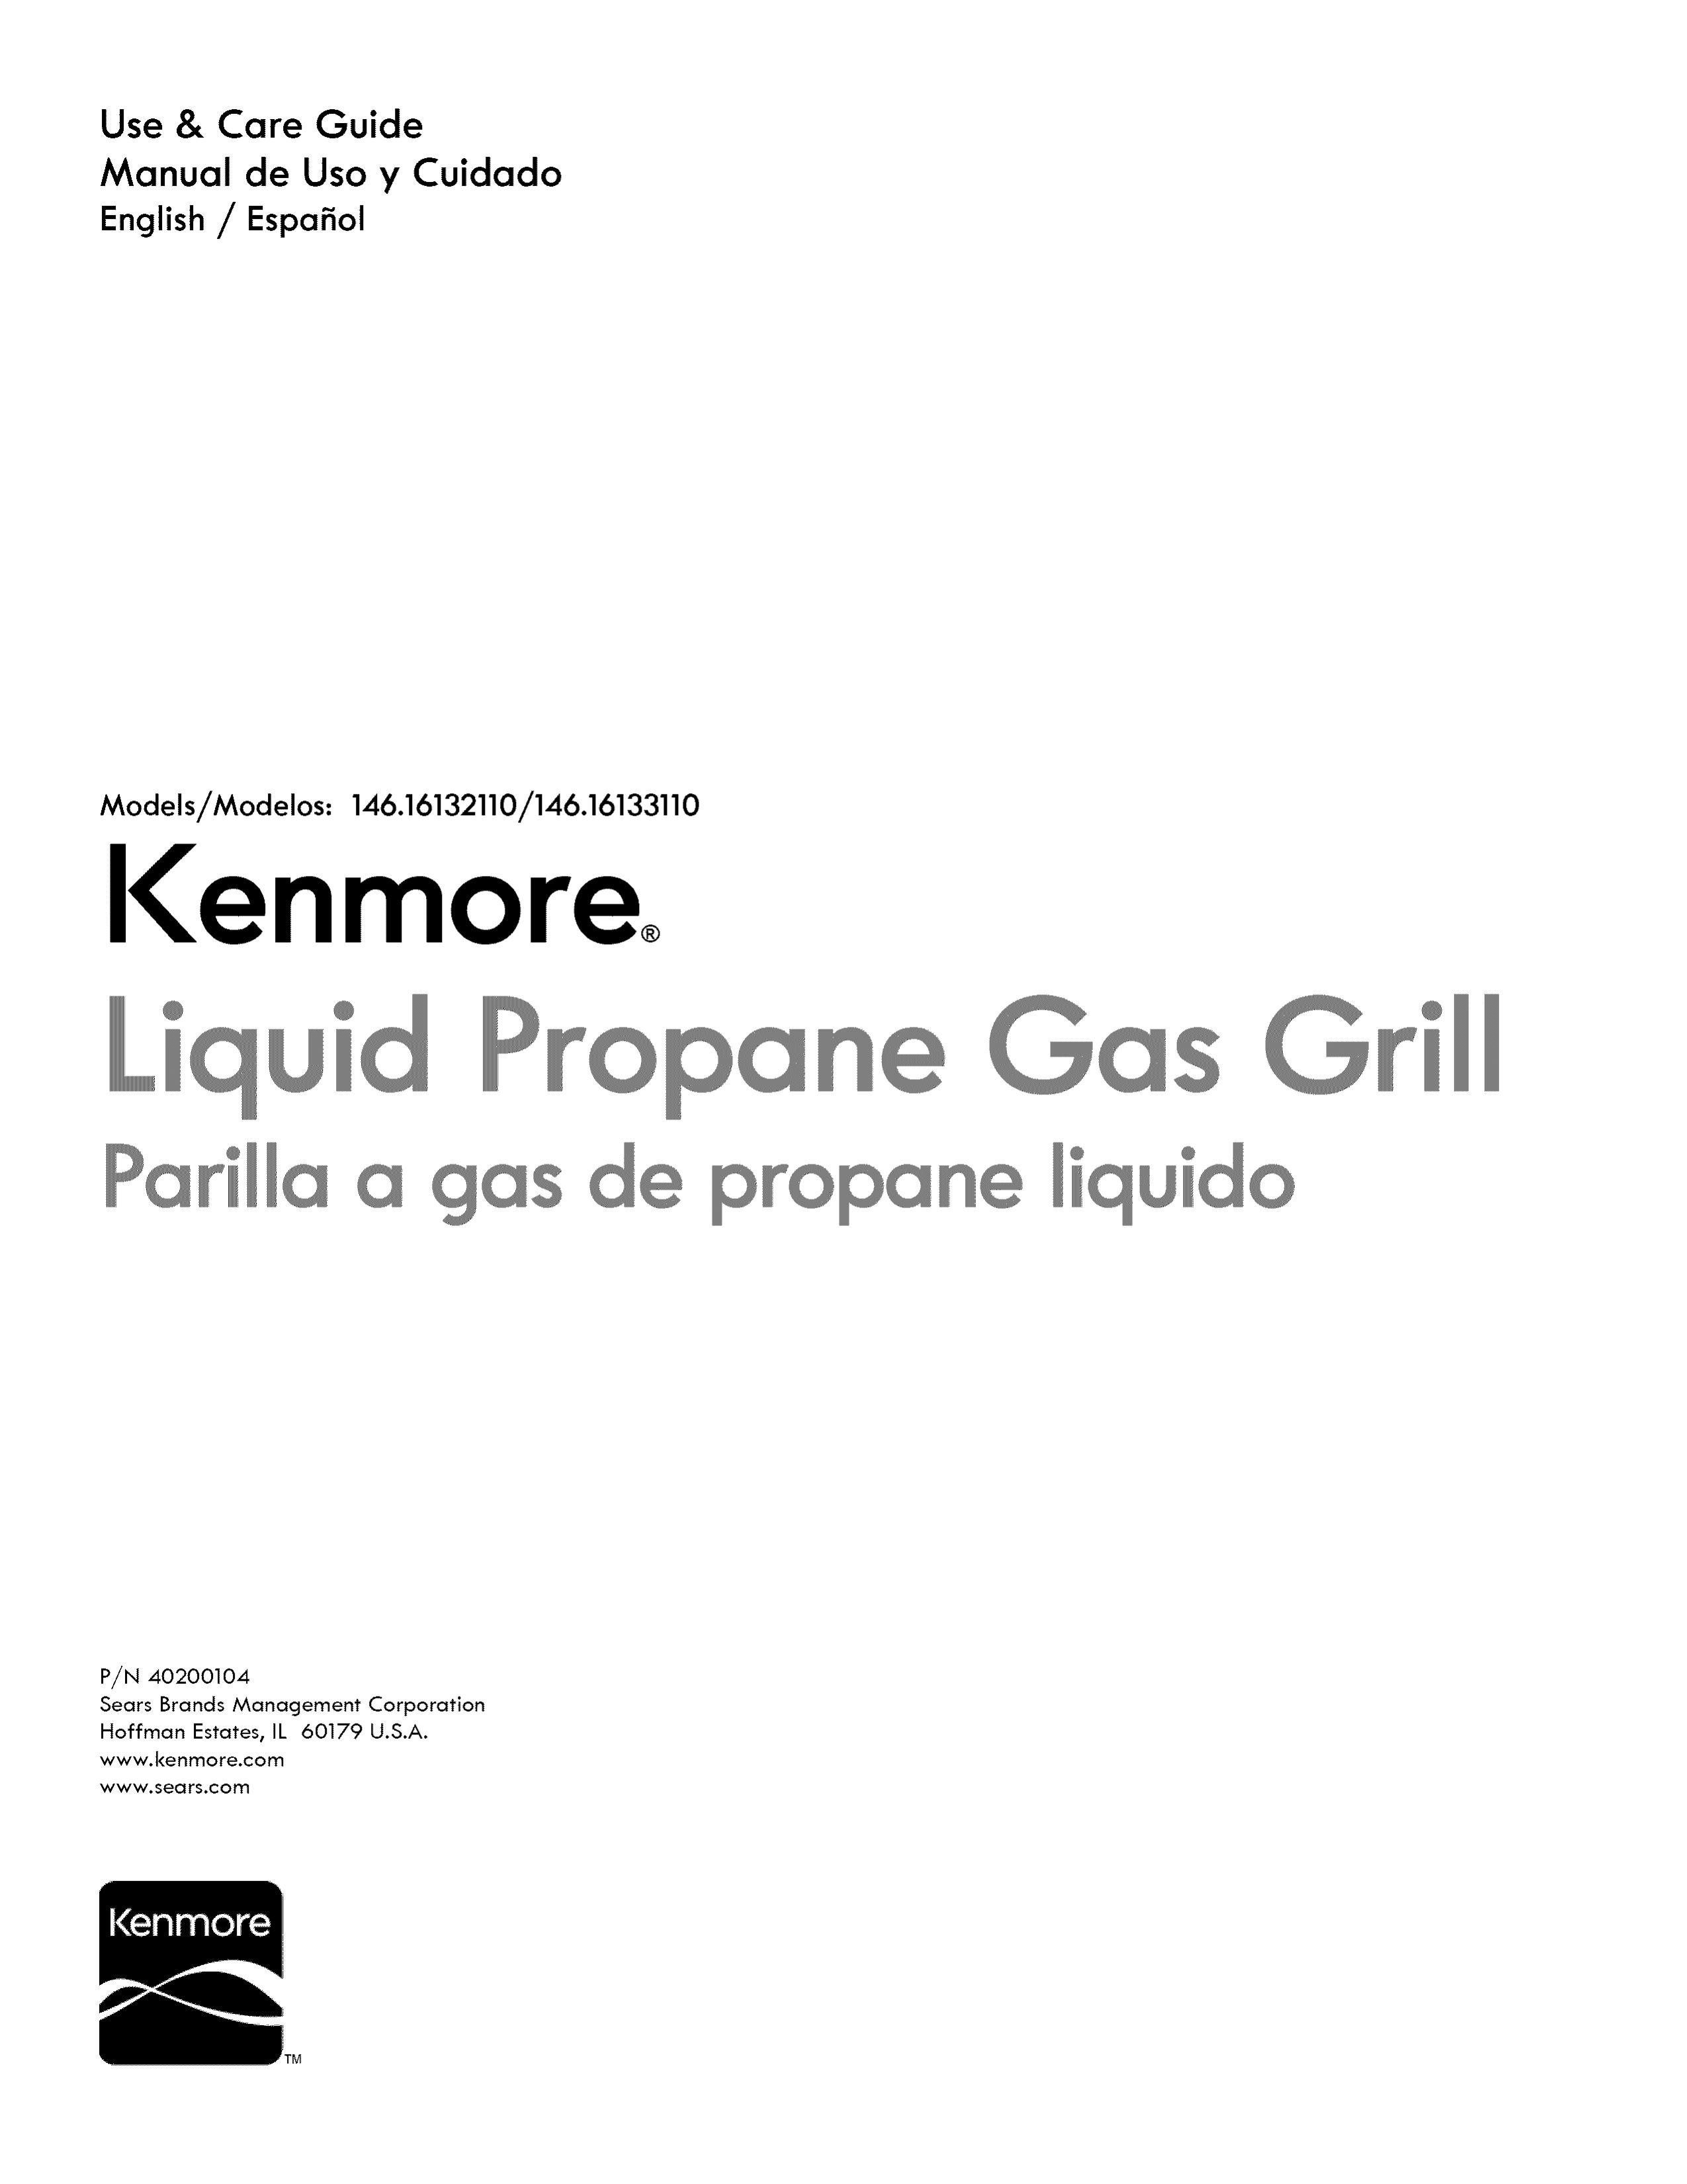 Kenmore 146.1613311 Gas Grill User Manual (Page 1)